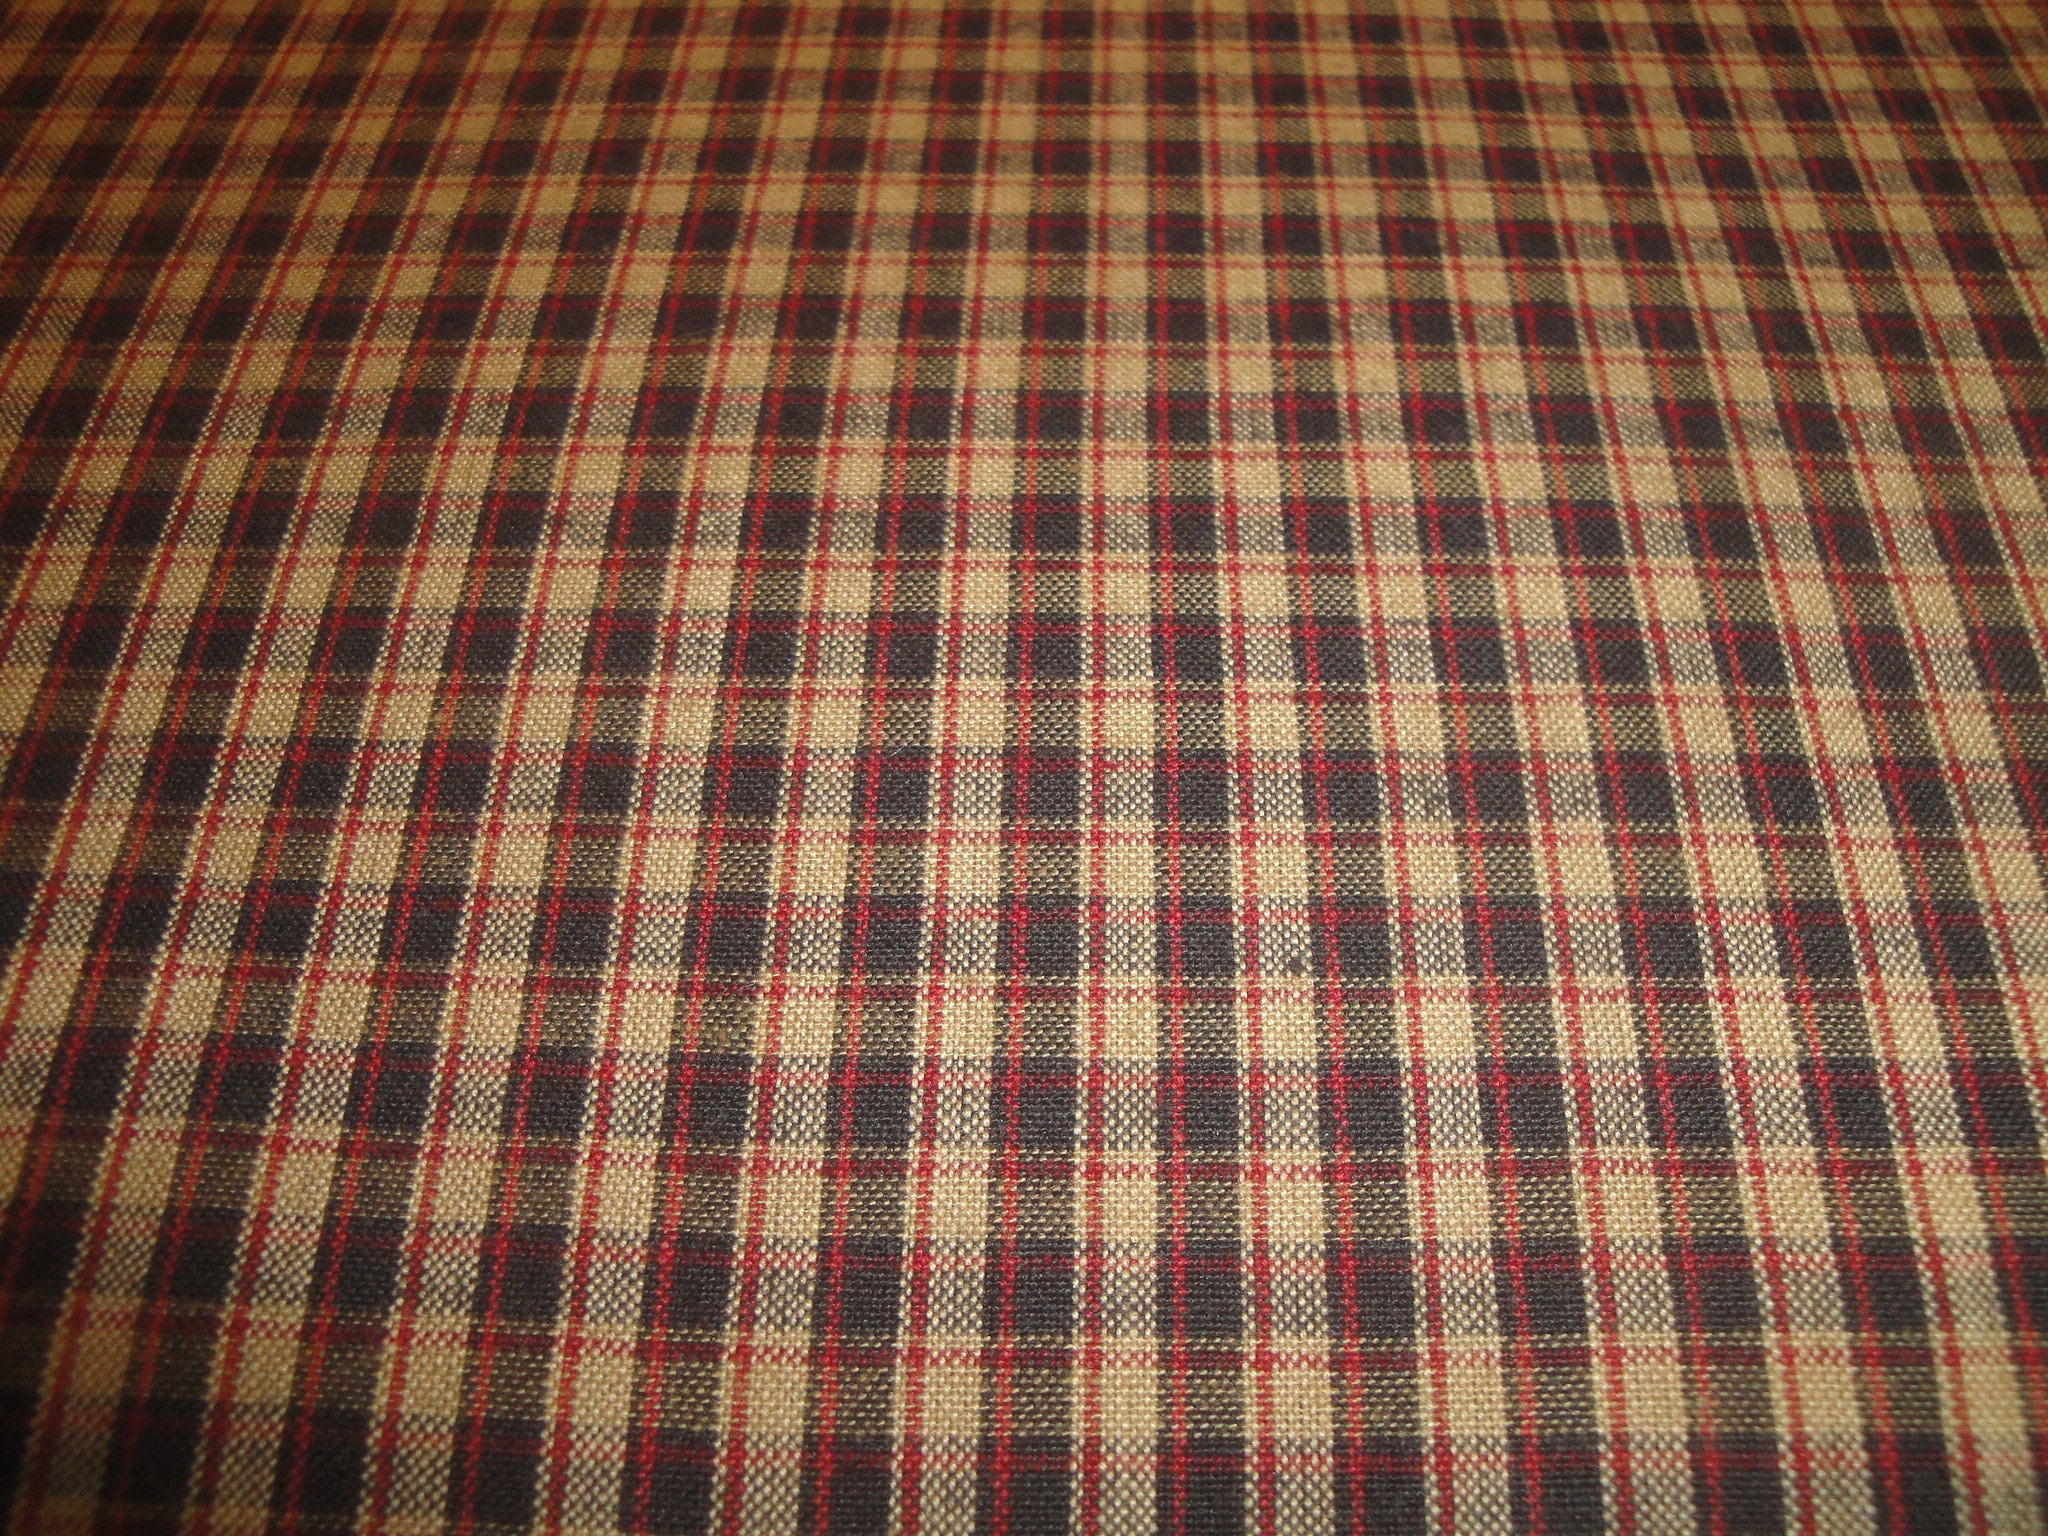 Navy Blue Red Tan Plaid Homespun Fabric, Cotton Quilt Home Decor Sewing  Fabric